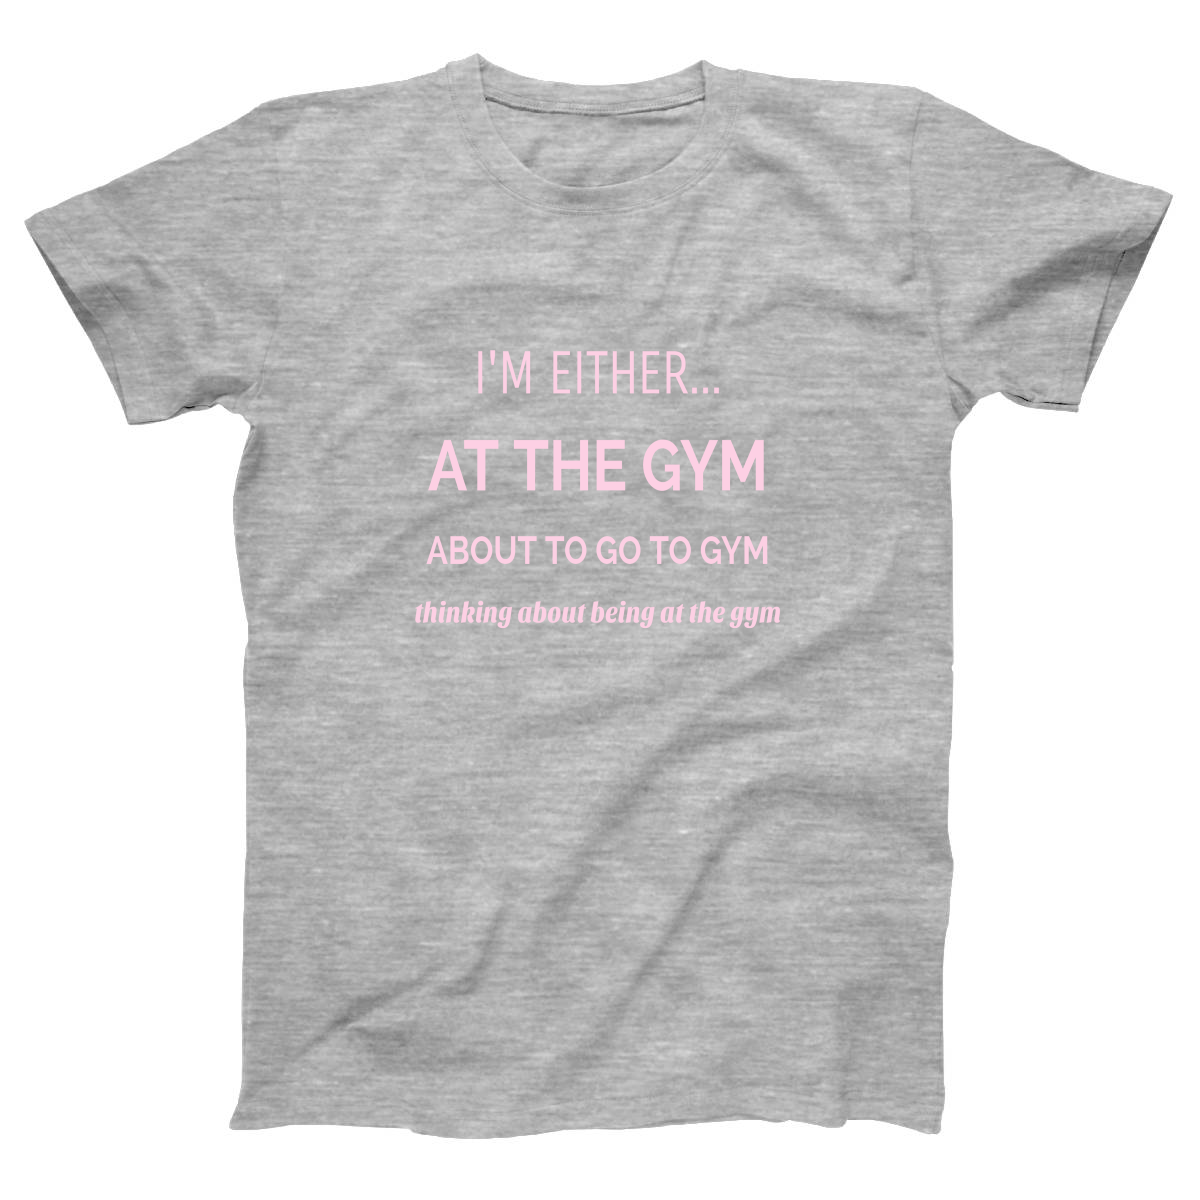 I’m either at the gym Women's T-shirt | Gray